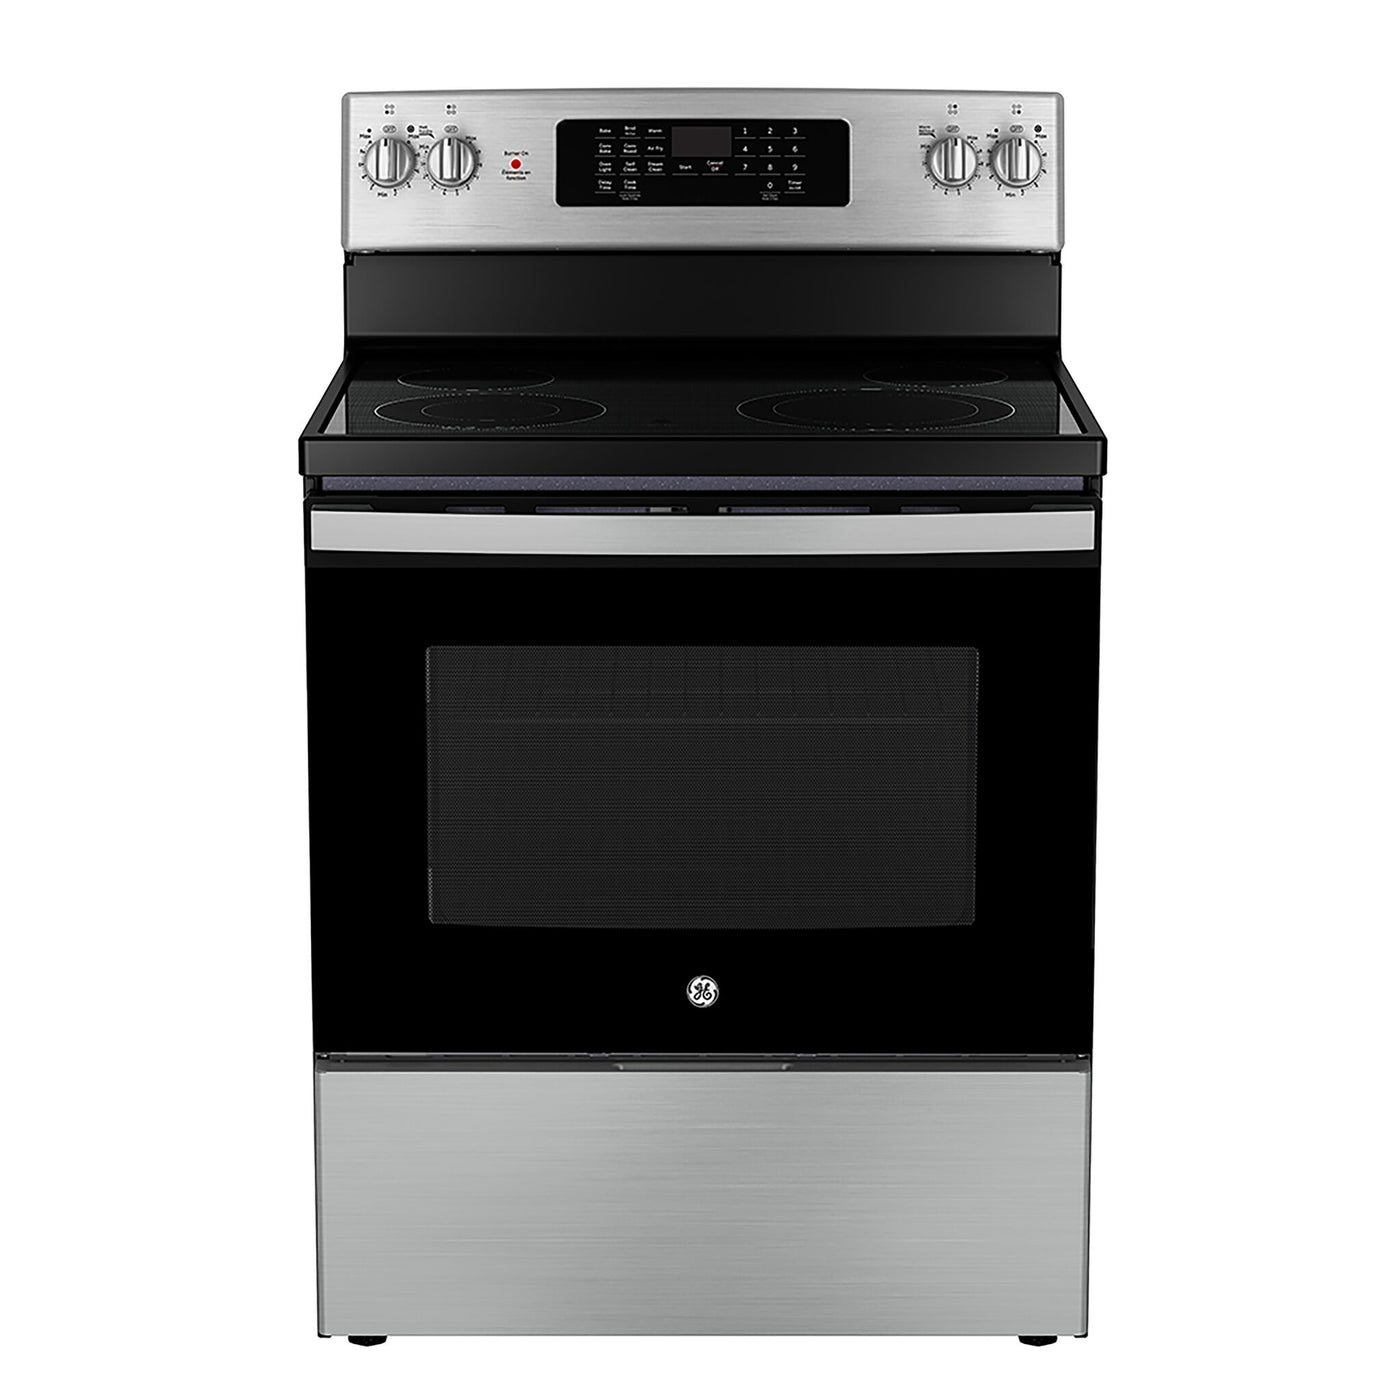 GE Stainless Steel Freestanding Electric Convection Range with No-Preheat Air Fry (5.0 Cu. Ft.) - JCB830STSS